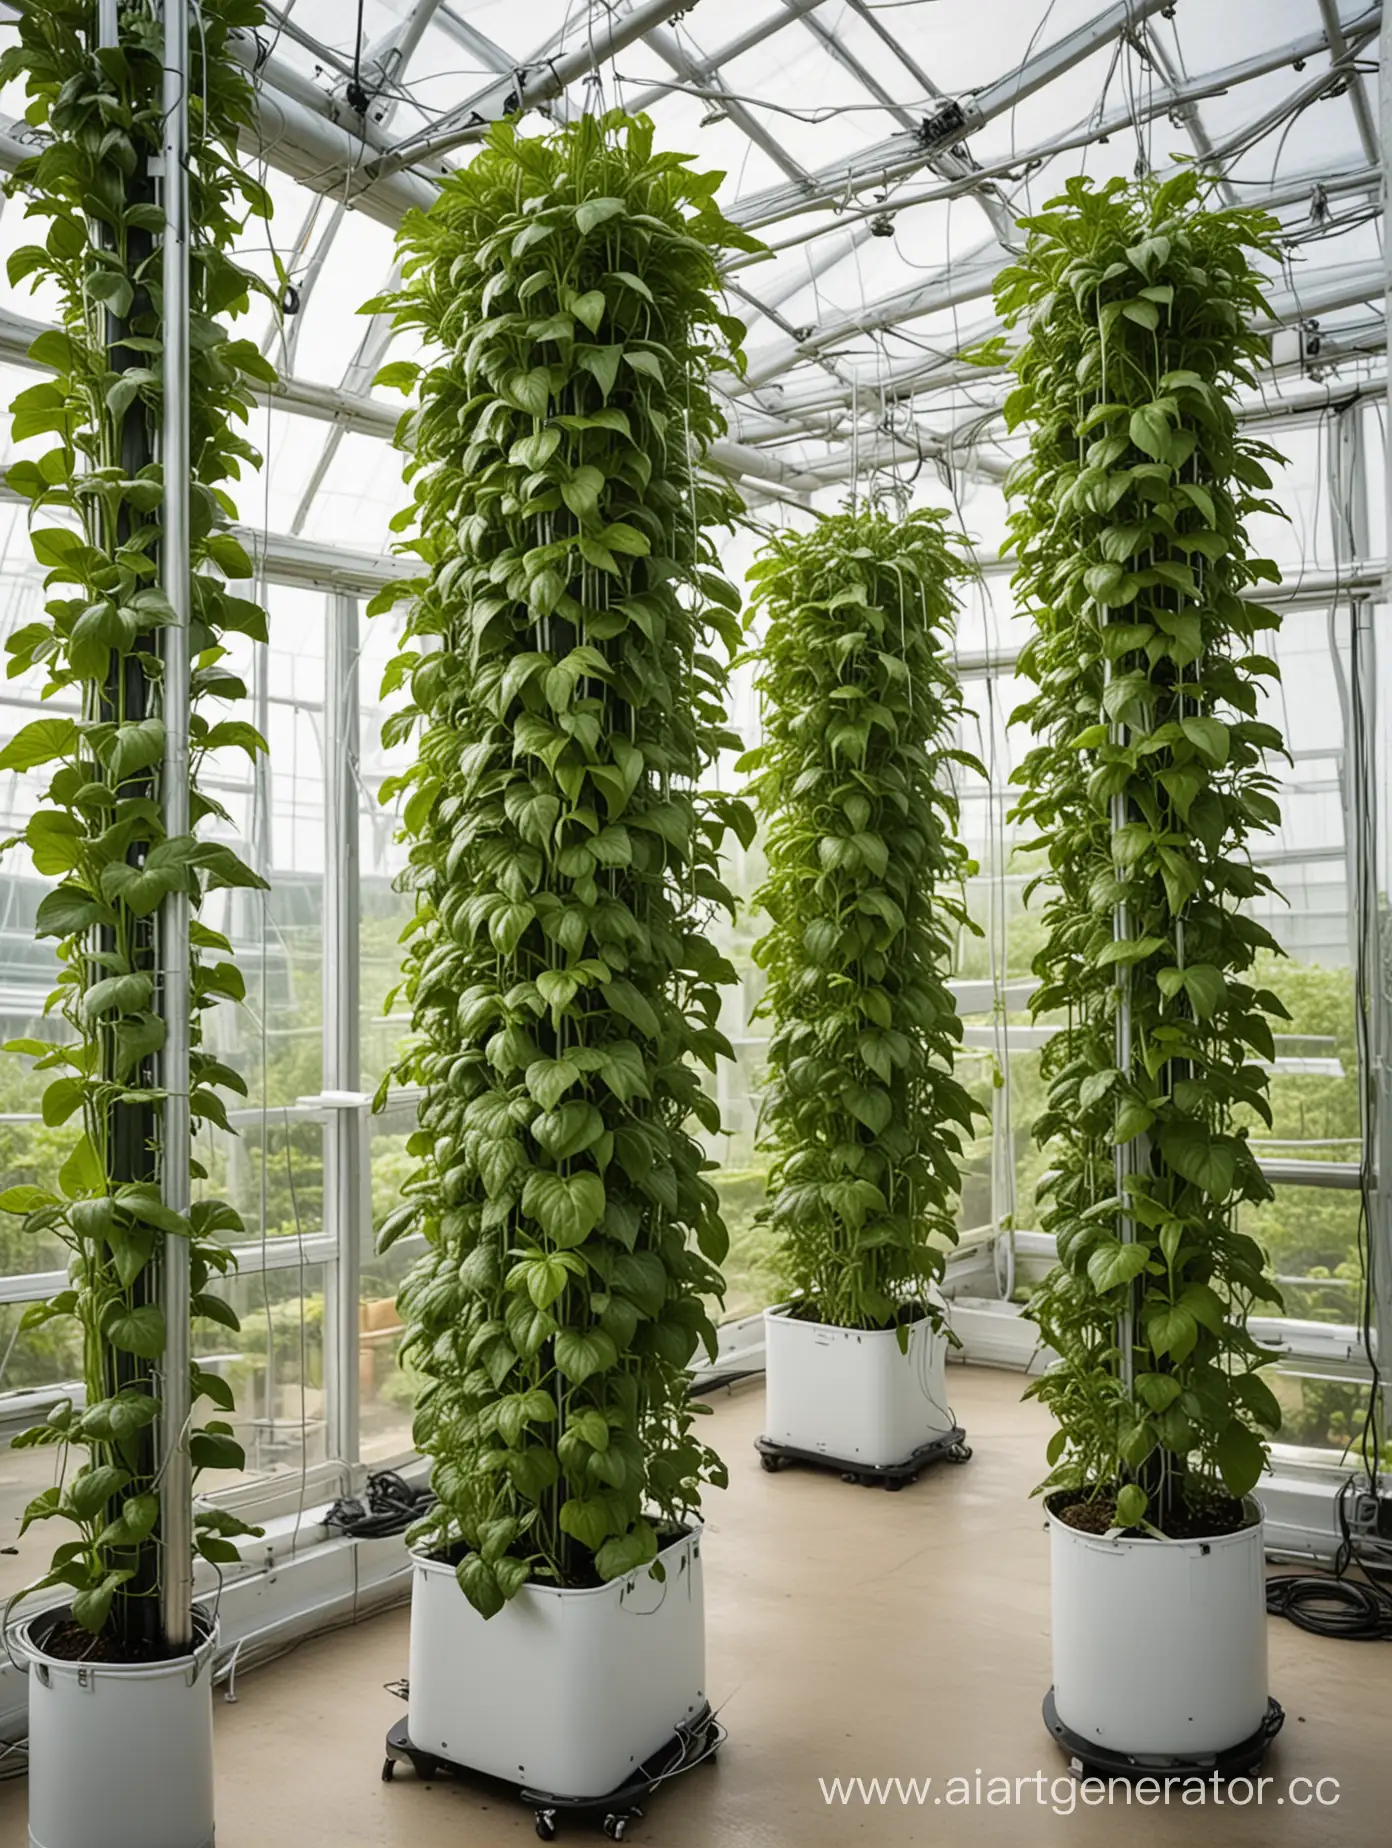 Aeroponic-Vertical-Green-Plant-Growing-System-in-Light-Greenhouse